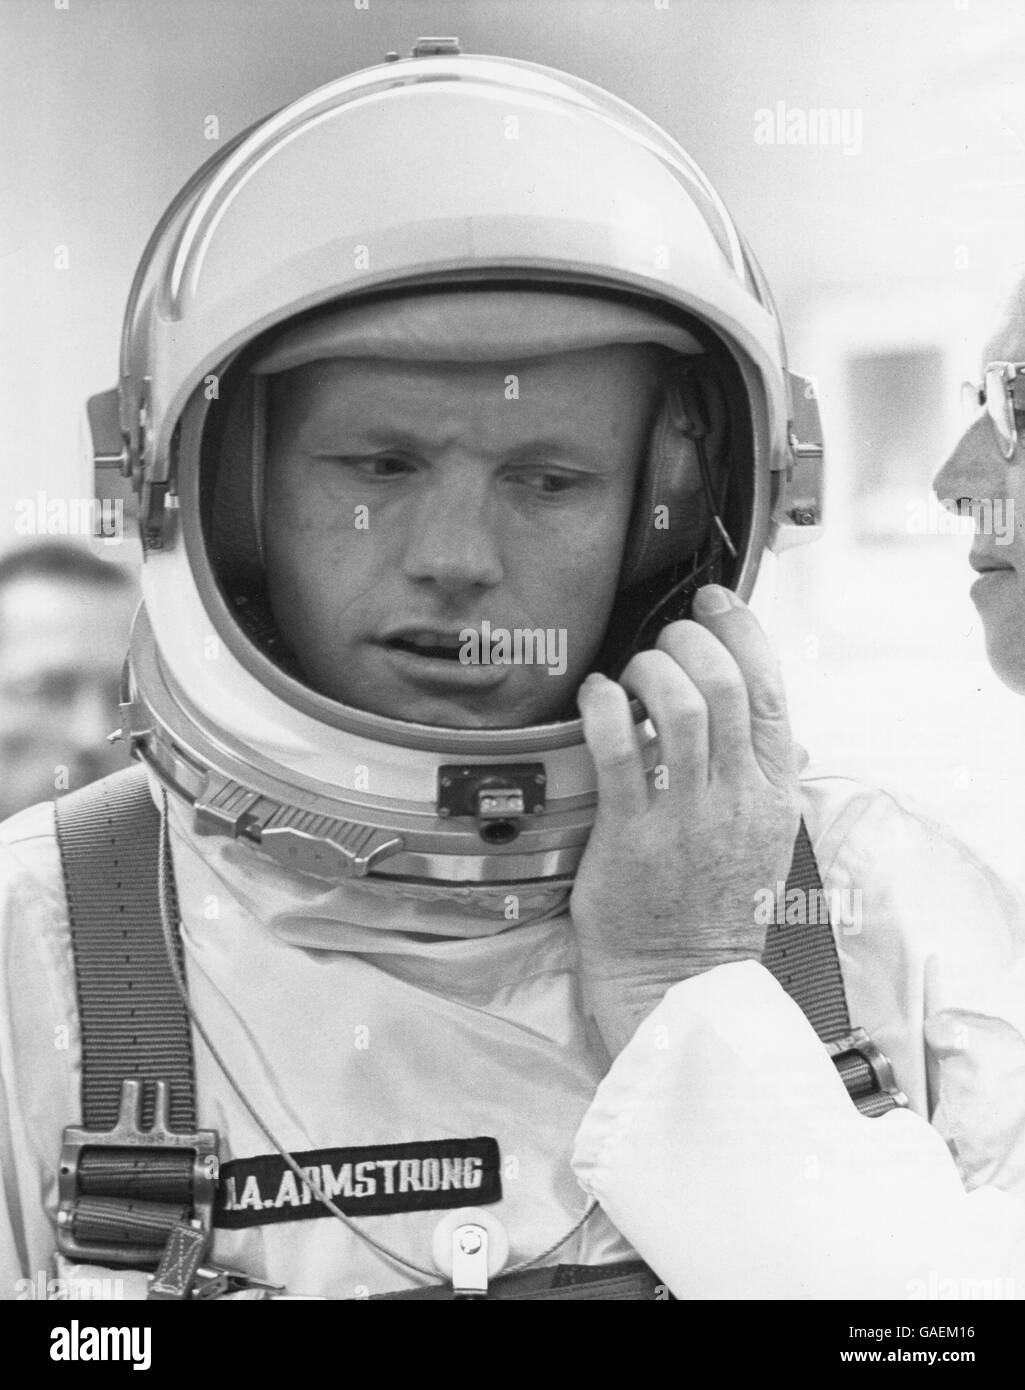 Gemini 8 Astronaut Neil A. Armstrong in his space helmet. Stock Photo